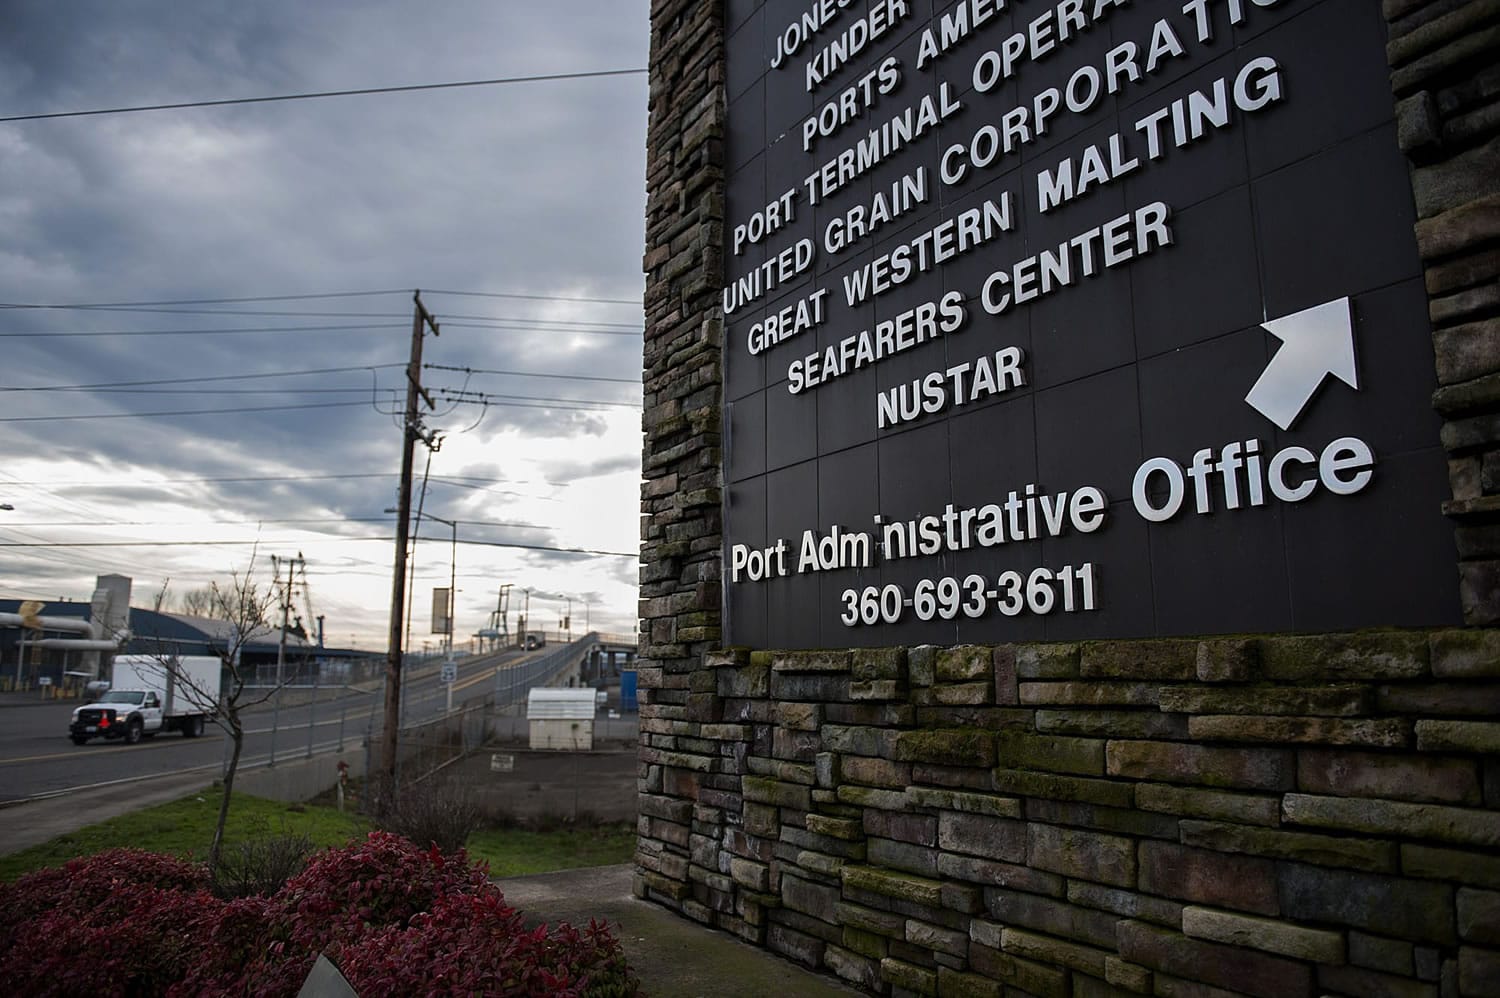 NuStar Energy, which is currently looking to handle crude oil and/or ethanol at its terminal, is located on Harborside Drive at the Port of Vancouver.